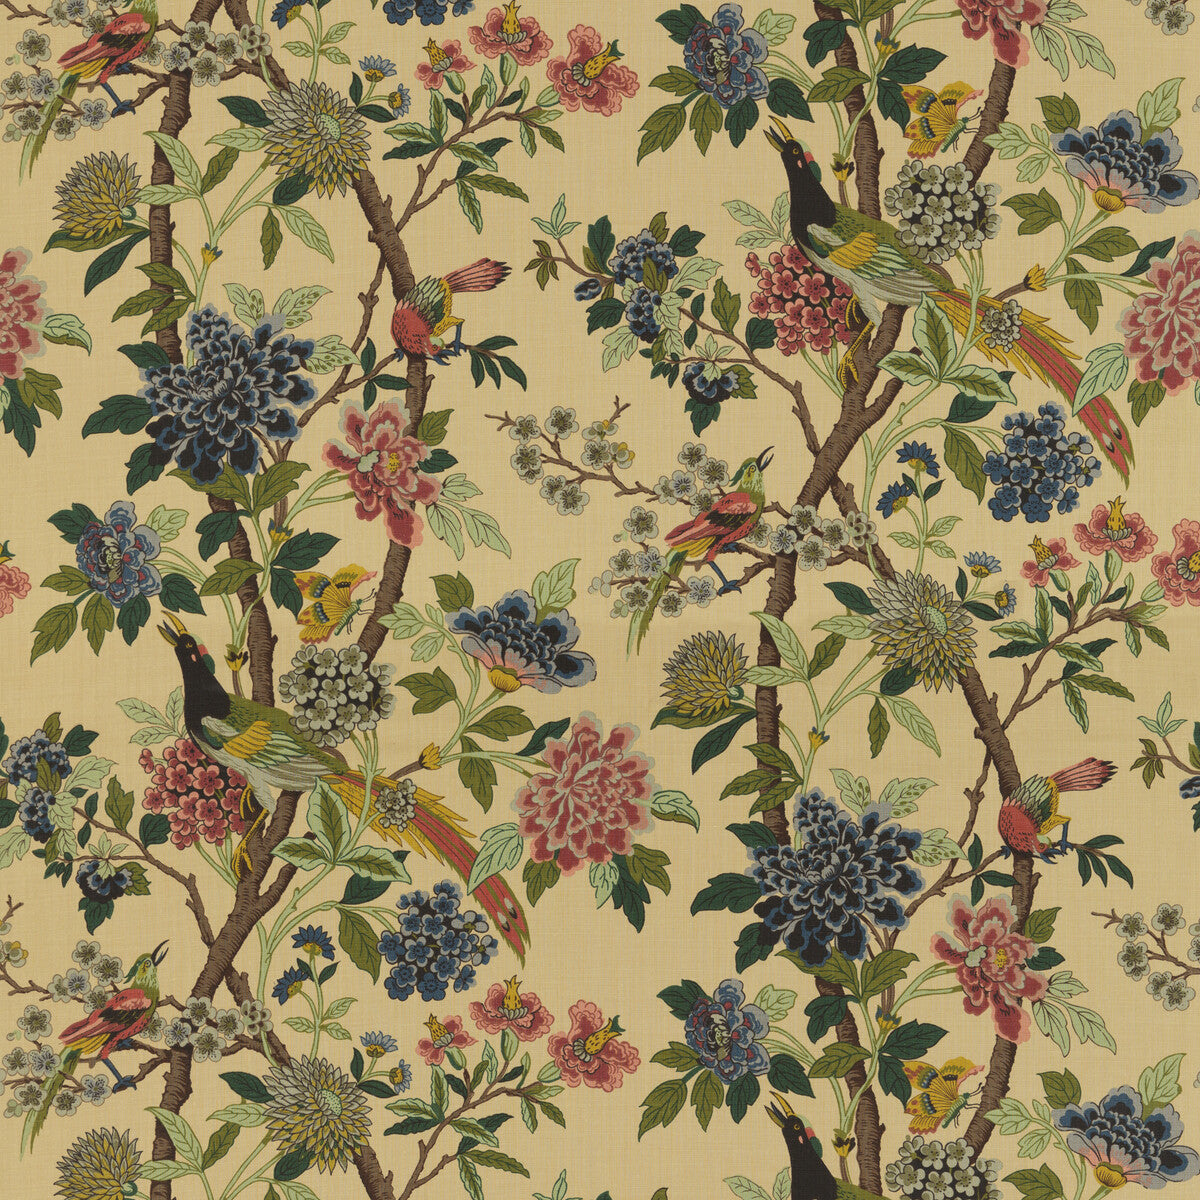 Hydrangea Bird fabric in parchment color - pattern BP10723.3.0 - by G P &amp; J Baker in the East To West collection